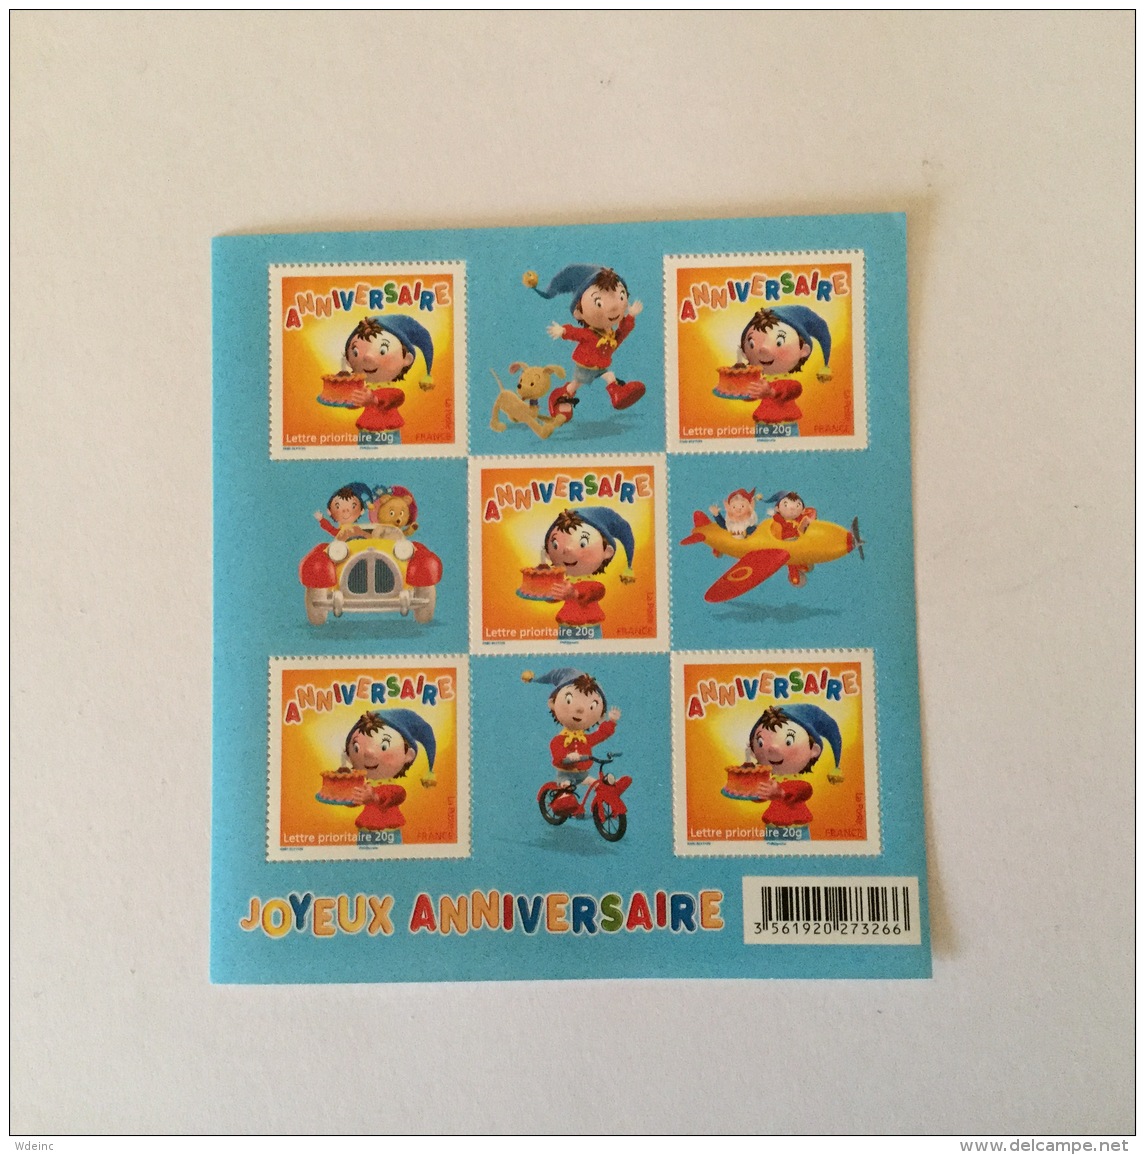 FRANCE 2008 Timbre Pour Anniversaires Oui-Oui (Noddy) Feuillet-M/S Superbe Neuf/MUH YV F4183 - Neufs